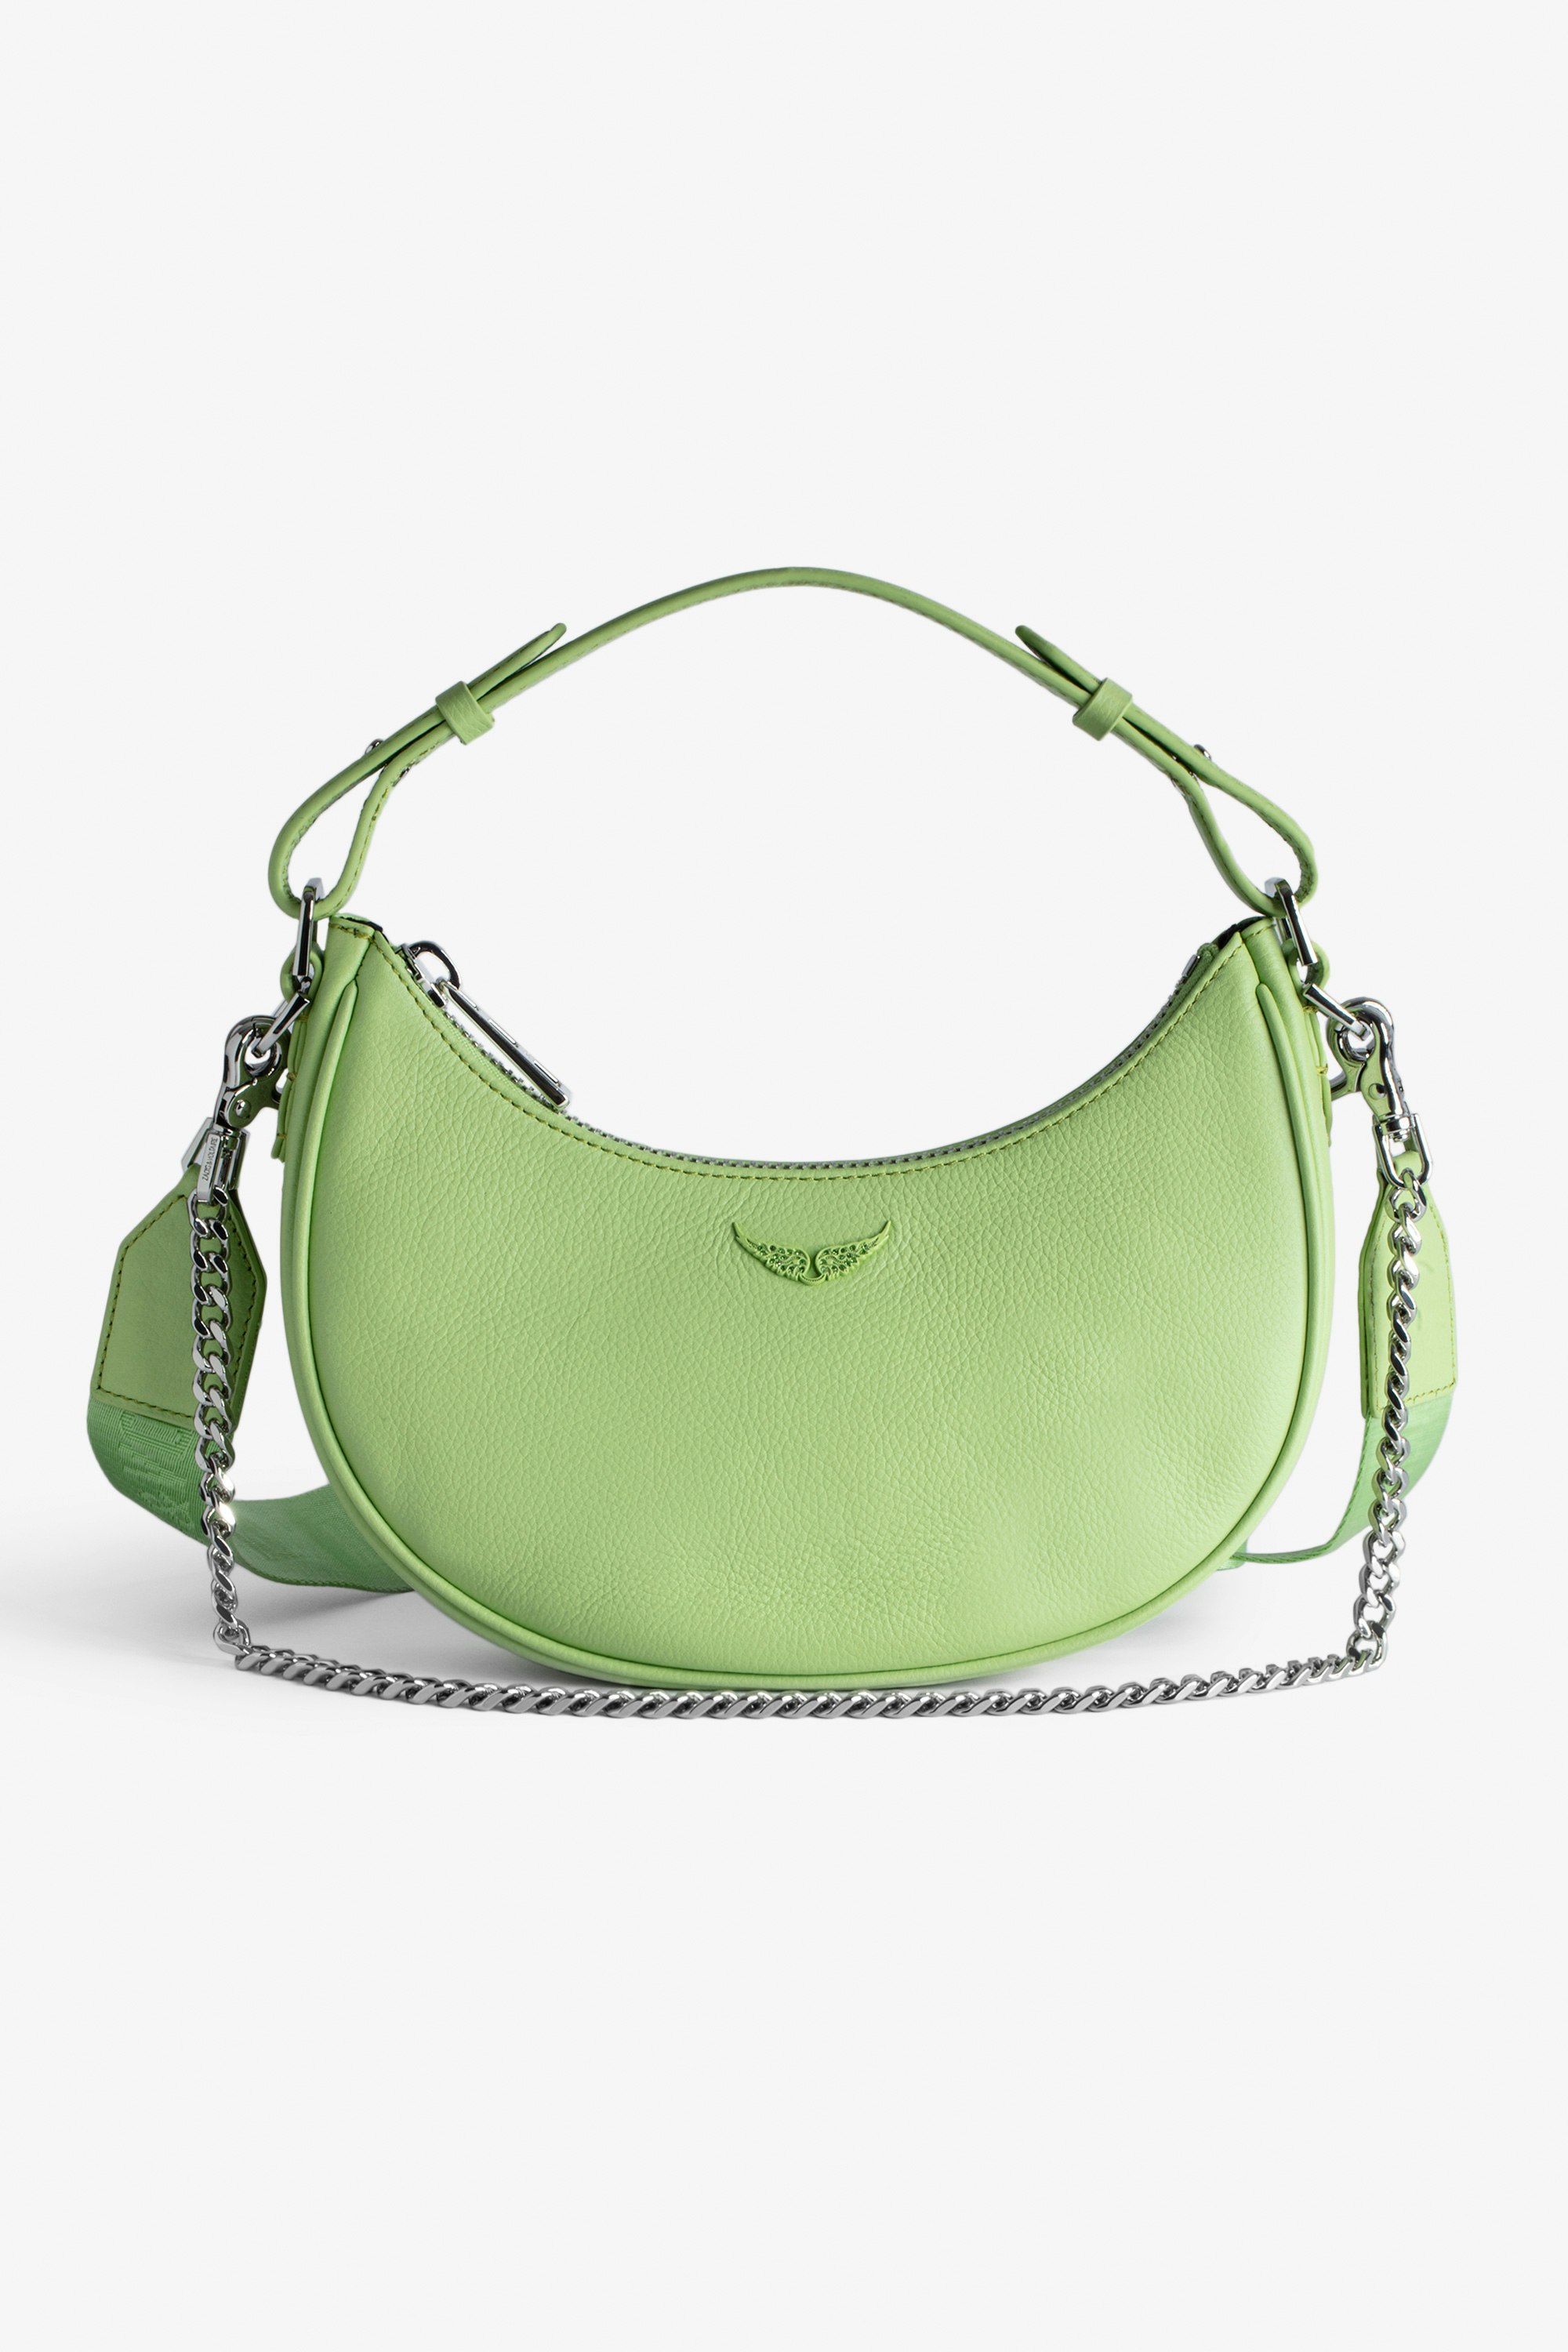 Moonrock Bag - Women’s half-moon bag in green grained leather with a short handle, shoulder strap, chain and signature wings.